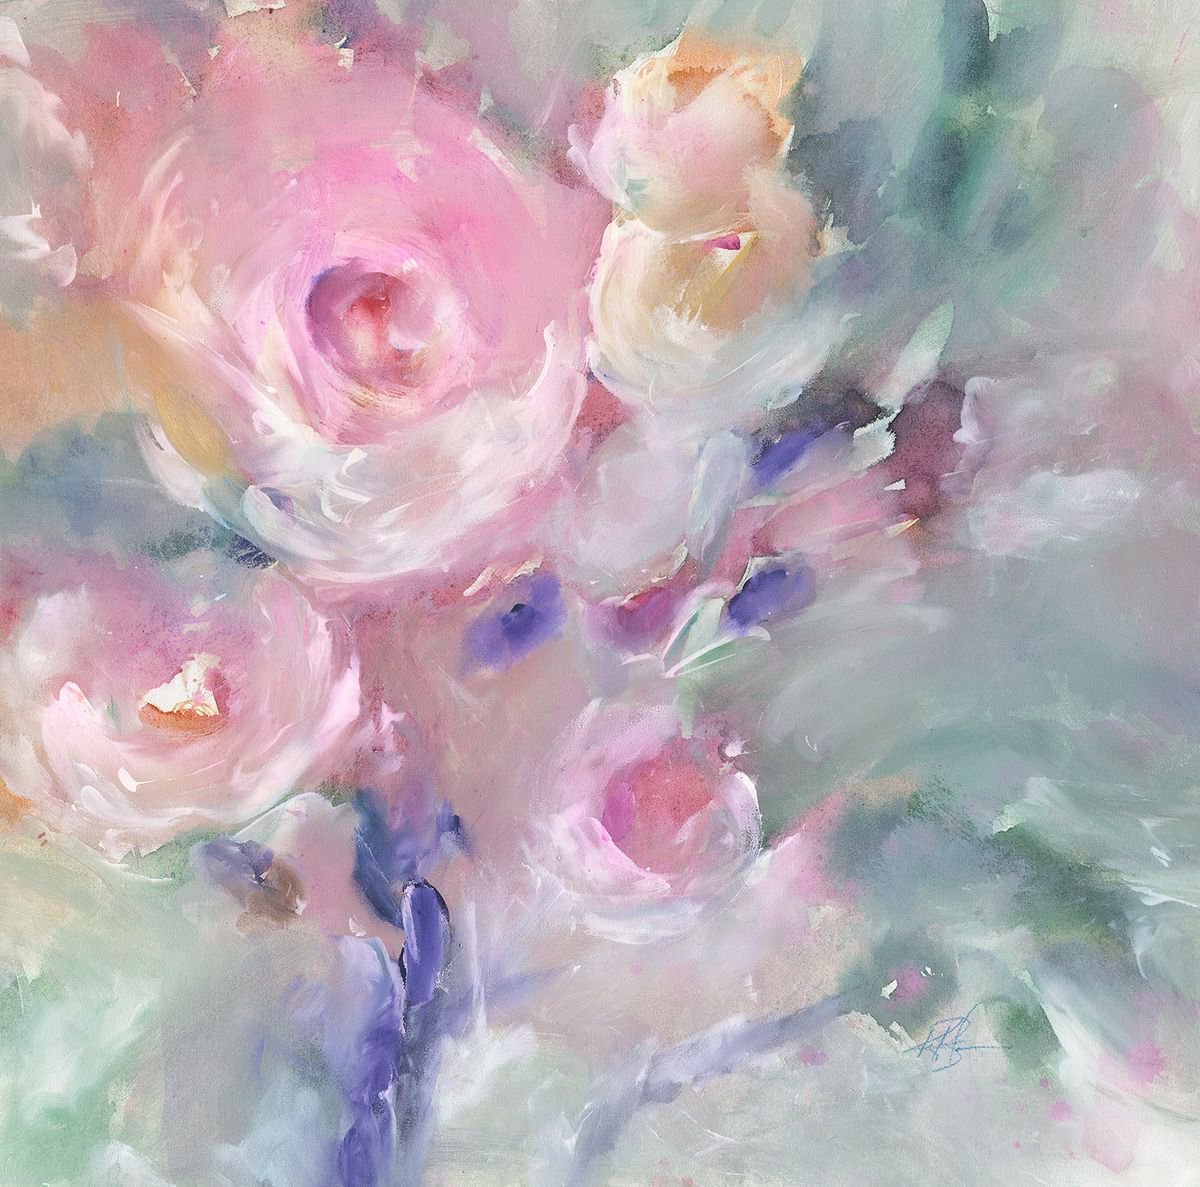 Soft Blooms No. 2 - 23x23in - Mixed Media Abstract Floral Painting by Kathy Morton Stanion... by Kathy Morton Stanion